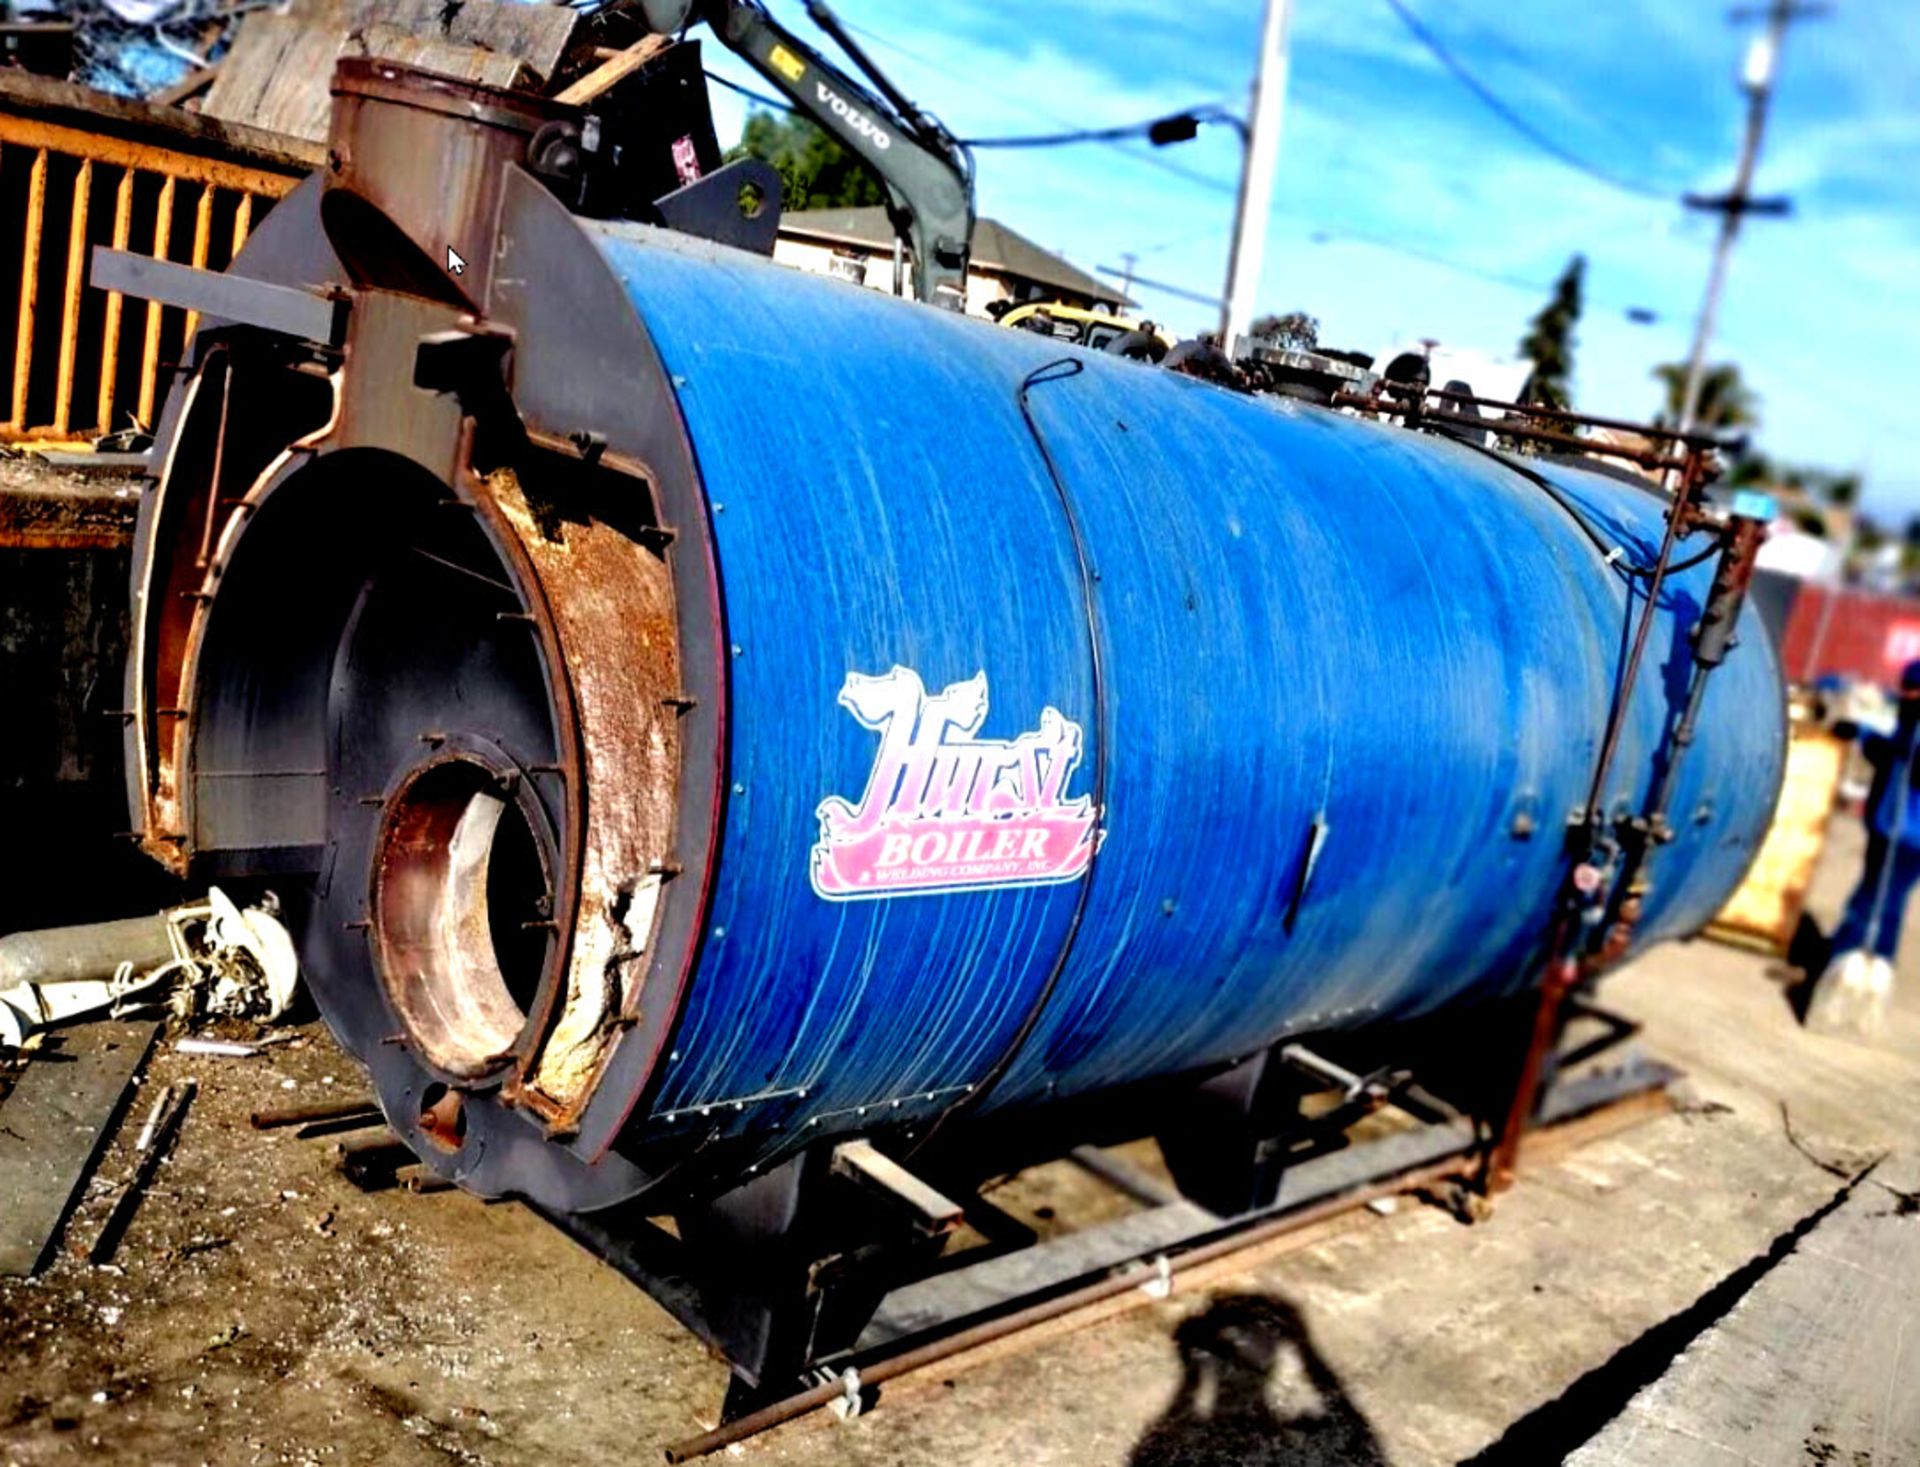 (Located in Hollister CA) 10 hp Hurst Firetube Boiler Unknown Series, Rigging Fee: $100